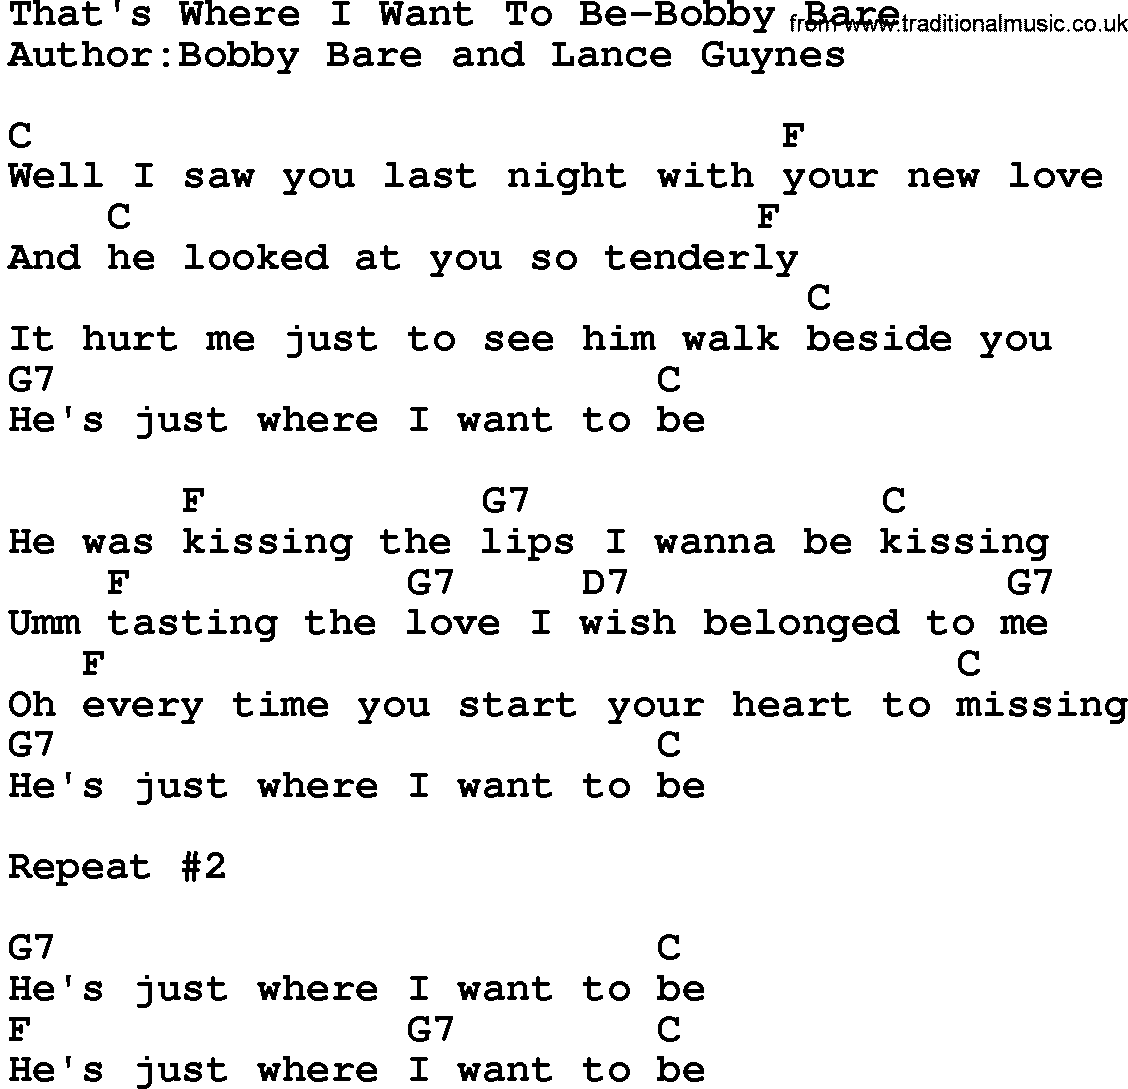 Country music song: That's Where I Want To Be-Bobby Bare lyrics and chords